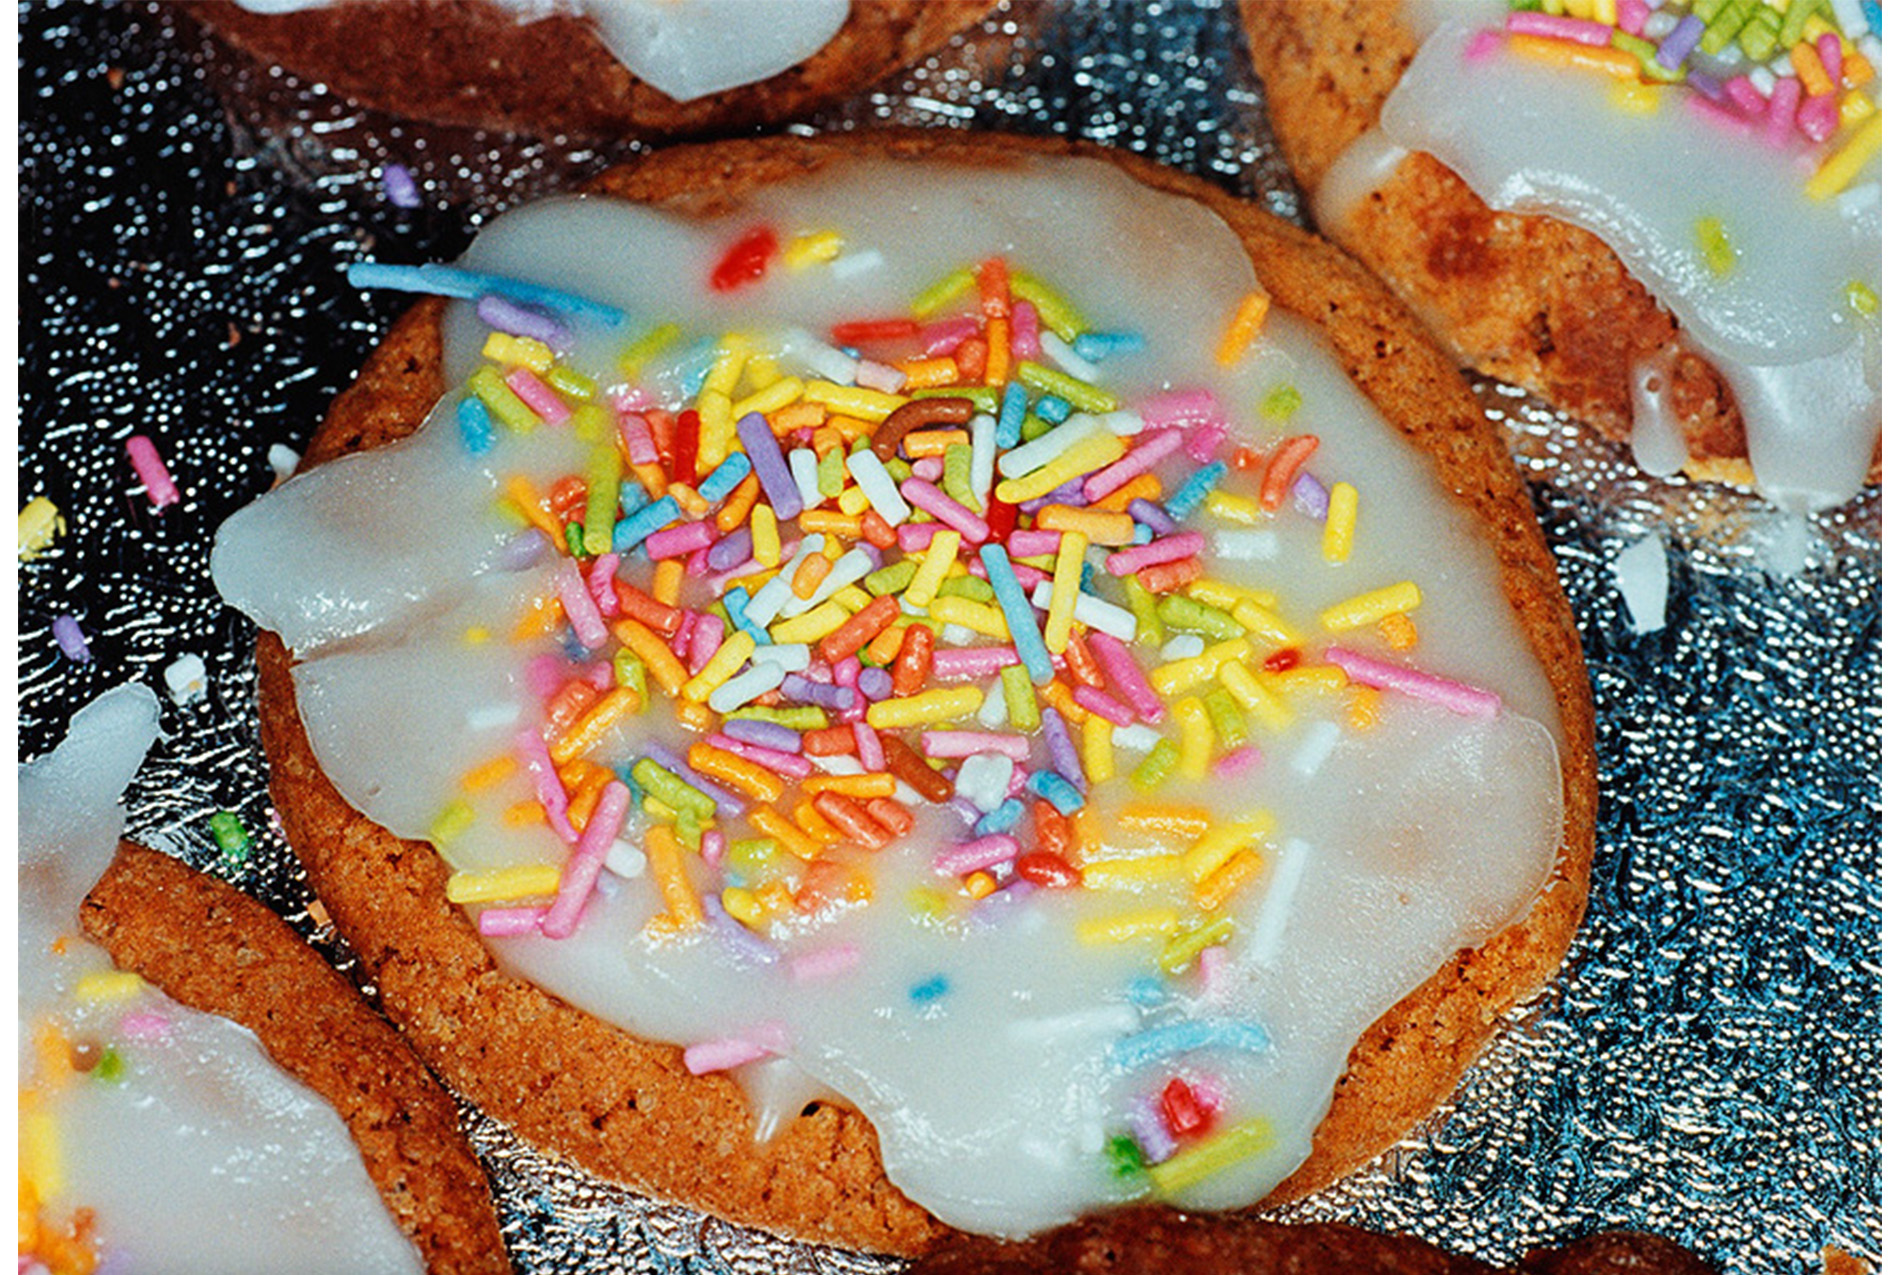 close-up, pressed metal patterned surface holding large flat cookies with white frosting and sprinkles